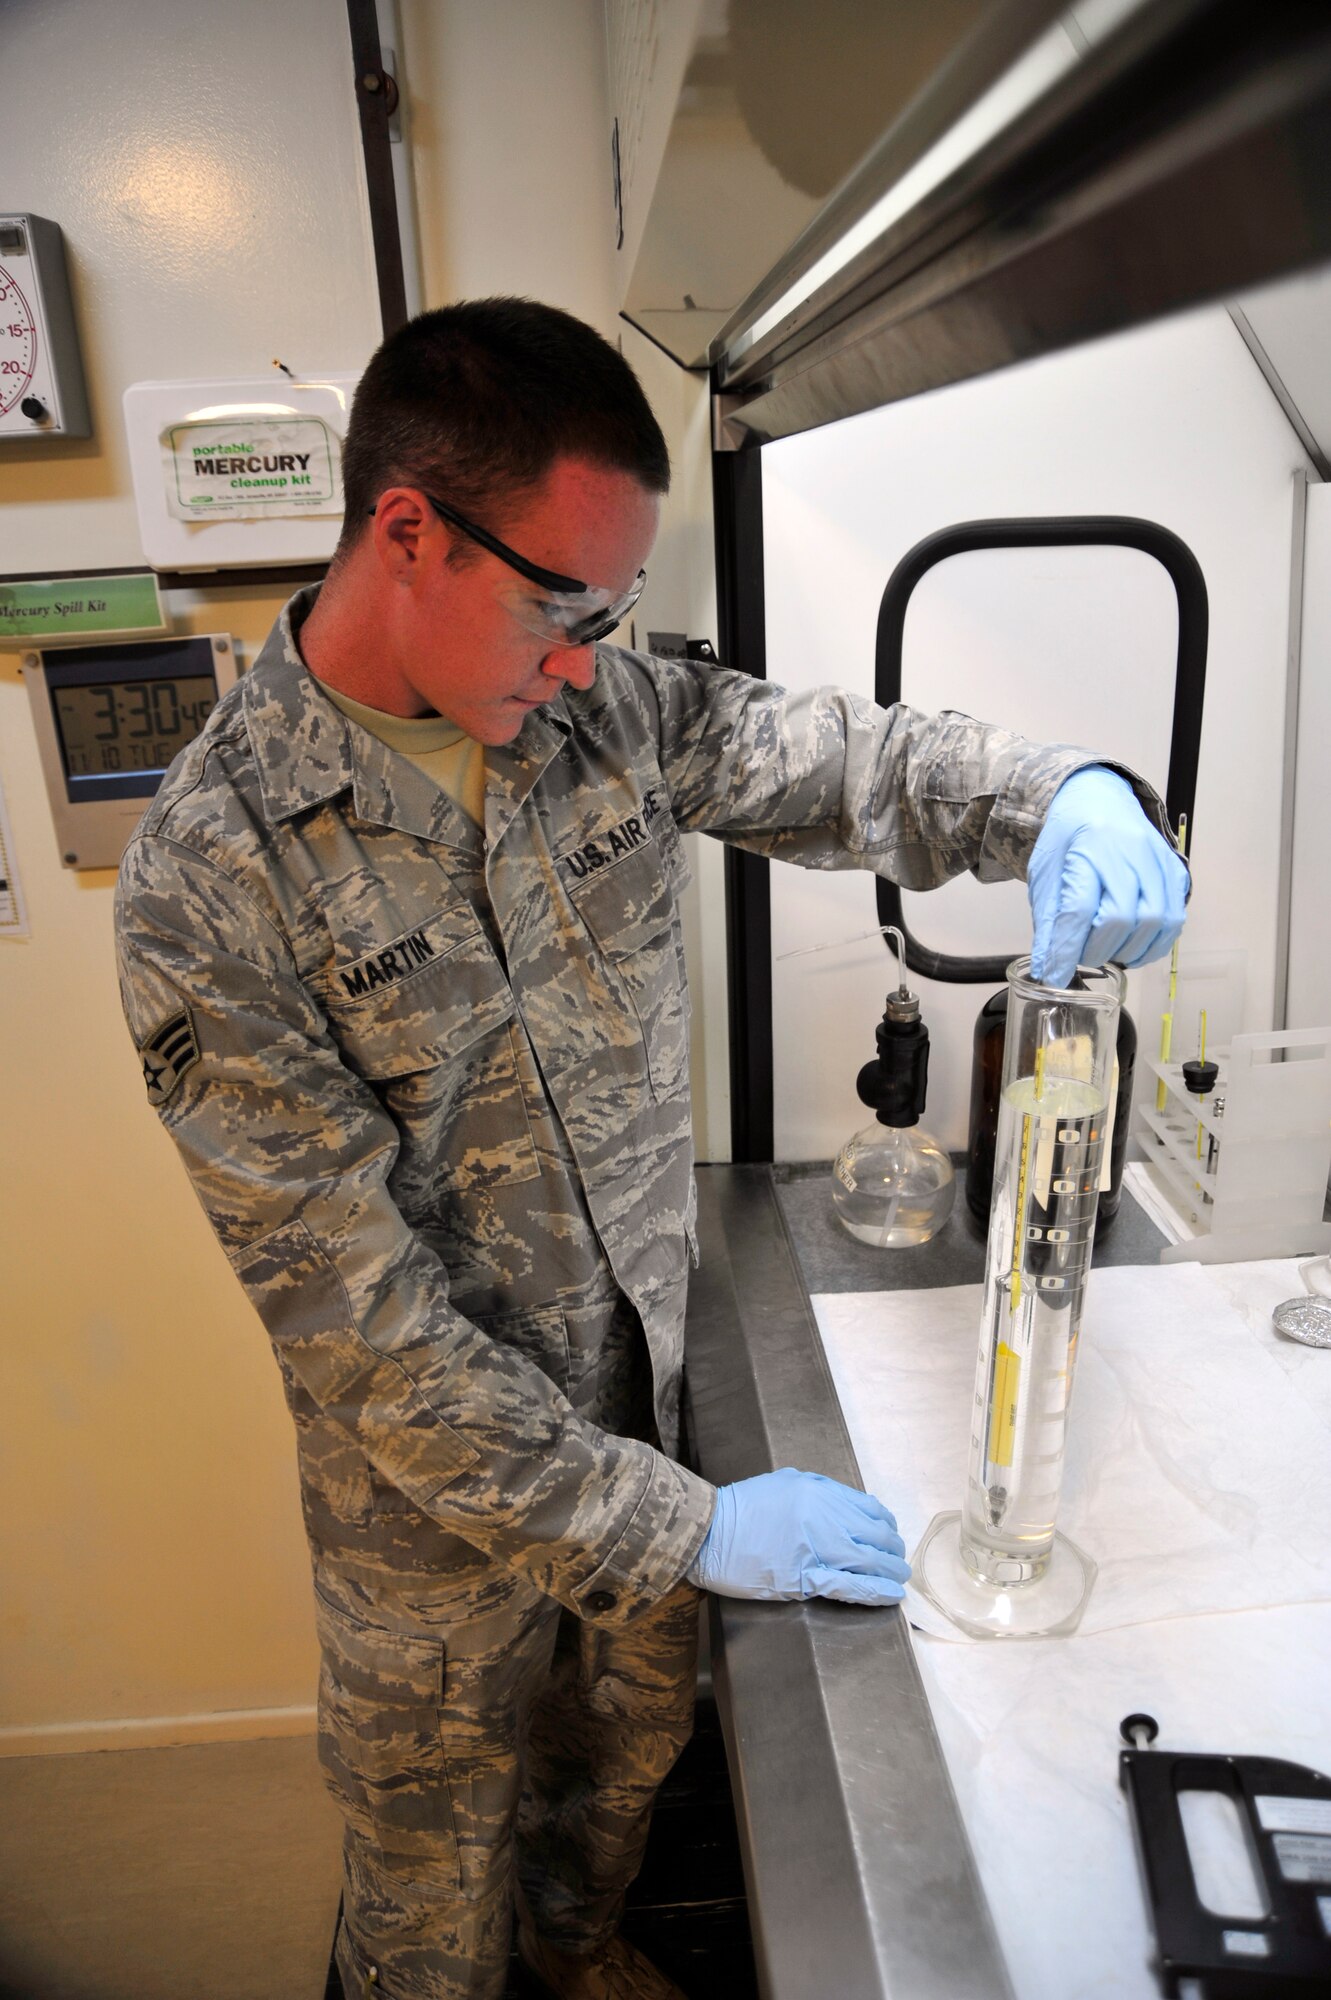 SOUTHWEST ASIA - Senior Airman Levi Martin, 380th Expeditionary Logistics Readiness Squadron fuel laboratory technician, drops a hydrometer in a beaker of jet fuel to test the fuel density Nov. 10, 2009. Airman Martin is deployed from Dover Air Force Base, Del., and grew up in Crestview, Fla. (U.S. Air Force photo/Tech. Sgt. Charles Larkin Sr)